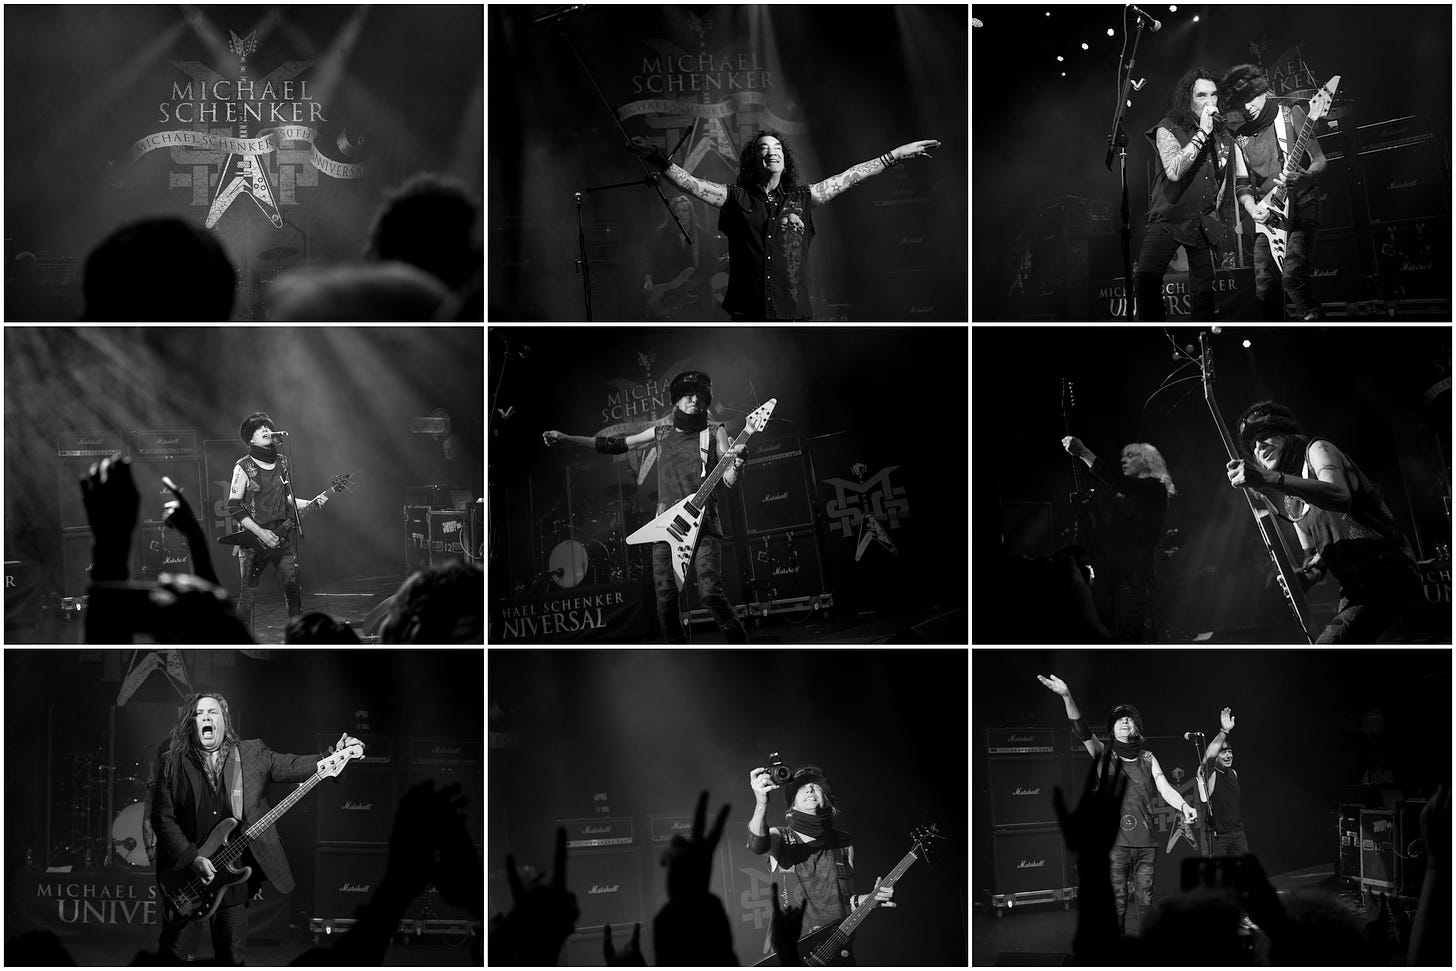 nine black and white images taken at a Michael Schenker concert. Mostly rock musicians performing.